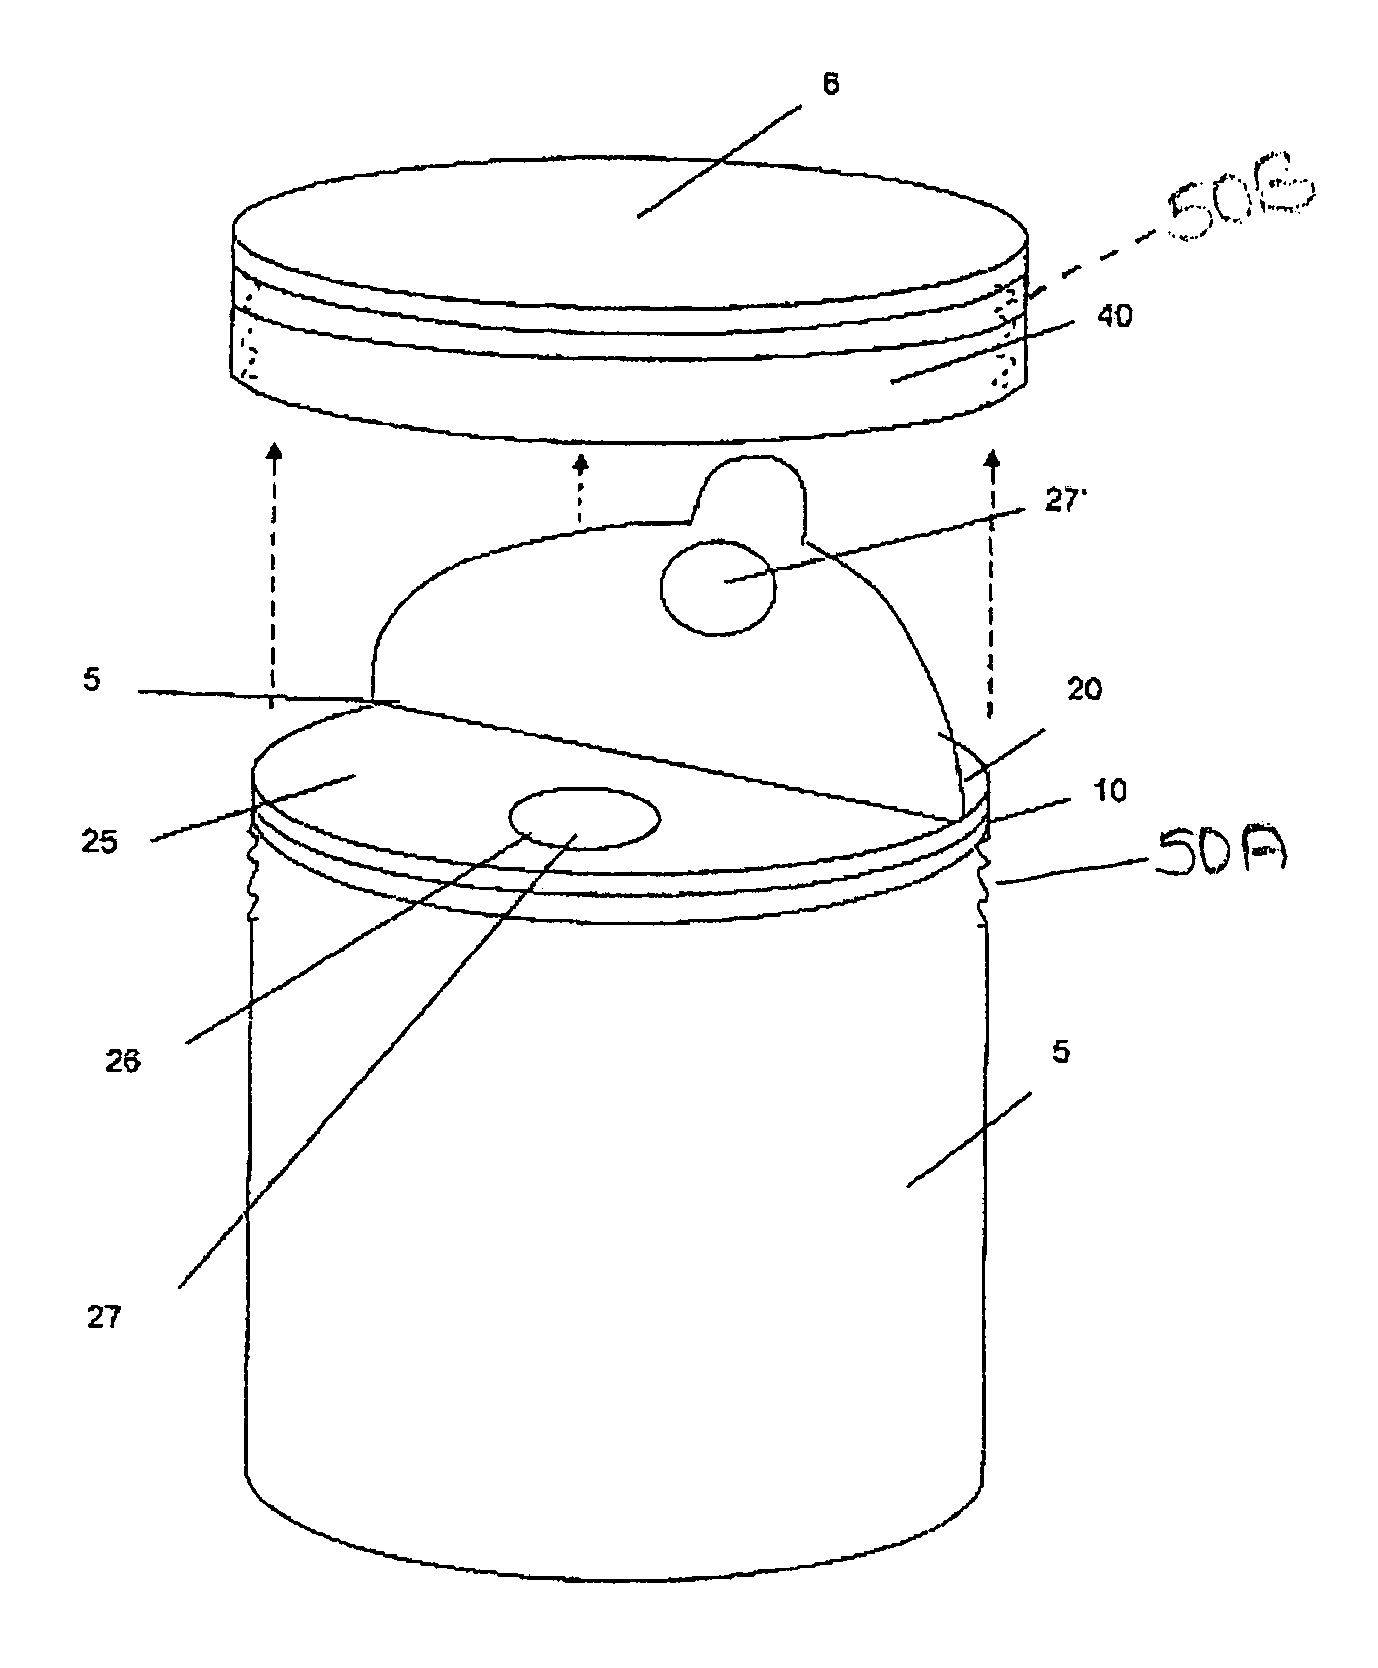 Sealing disk for induction sealing a container